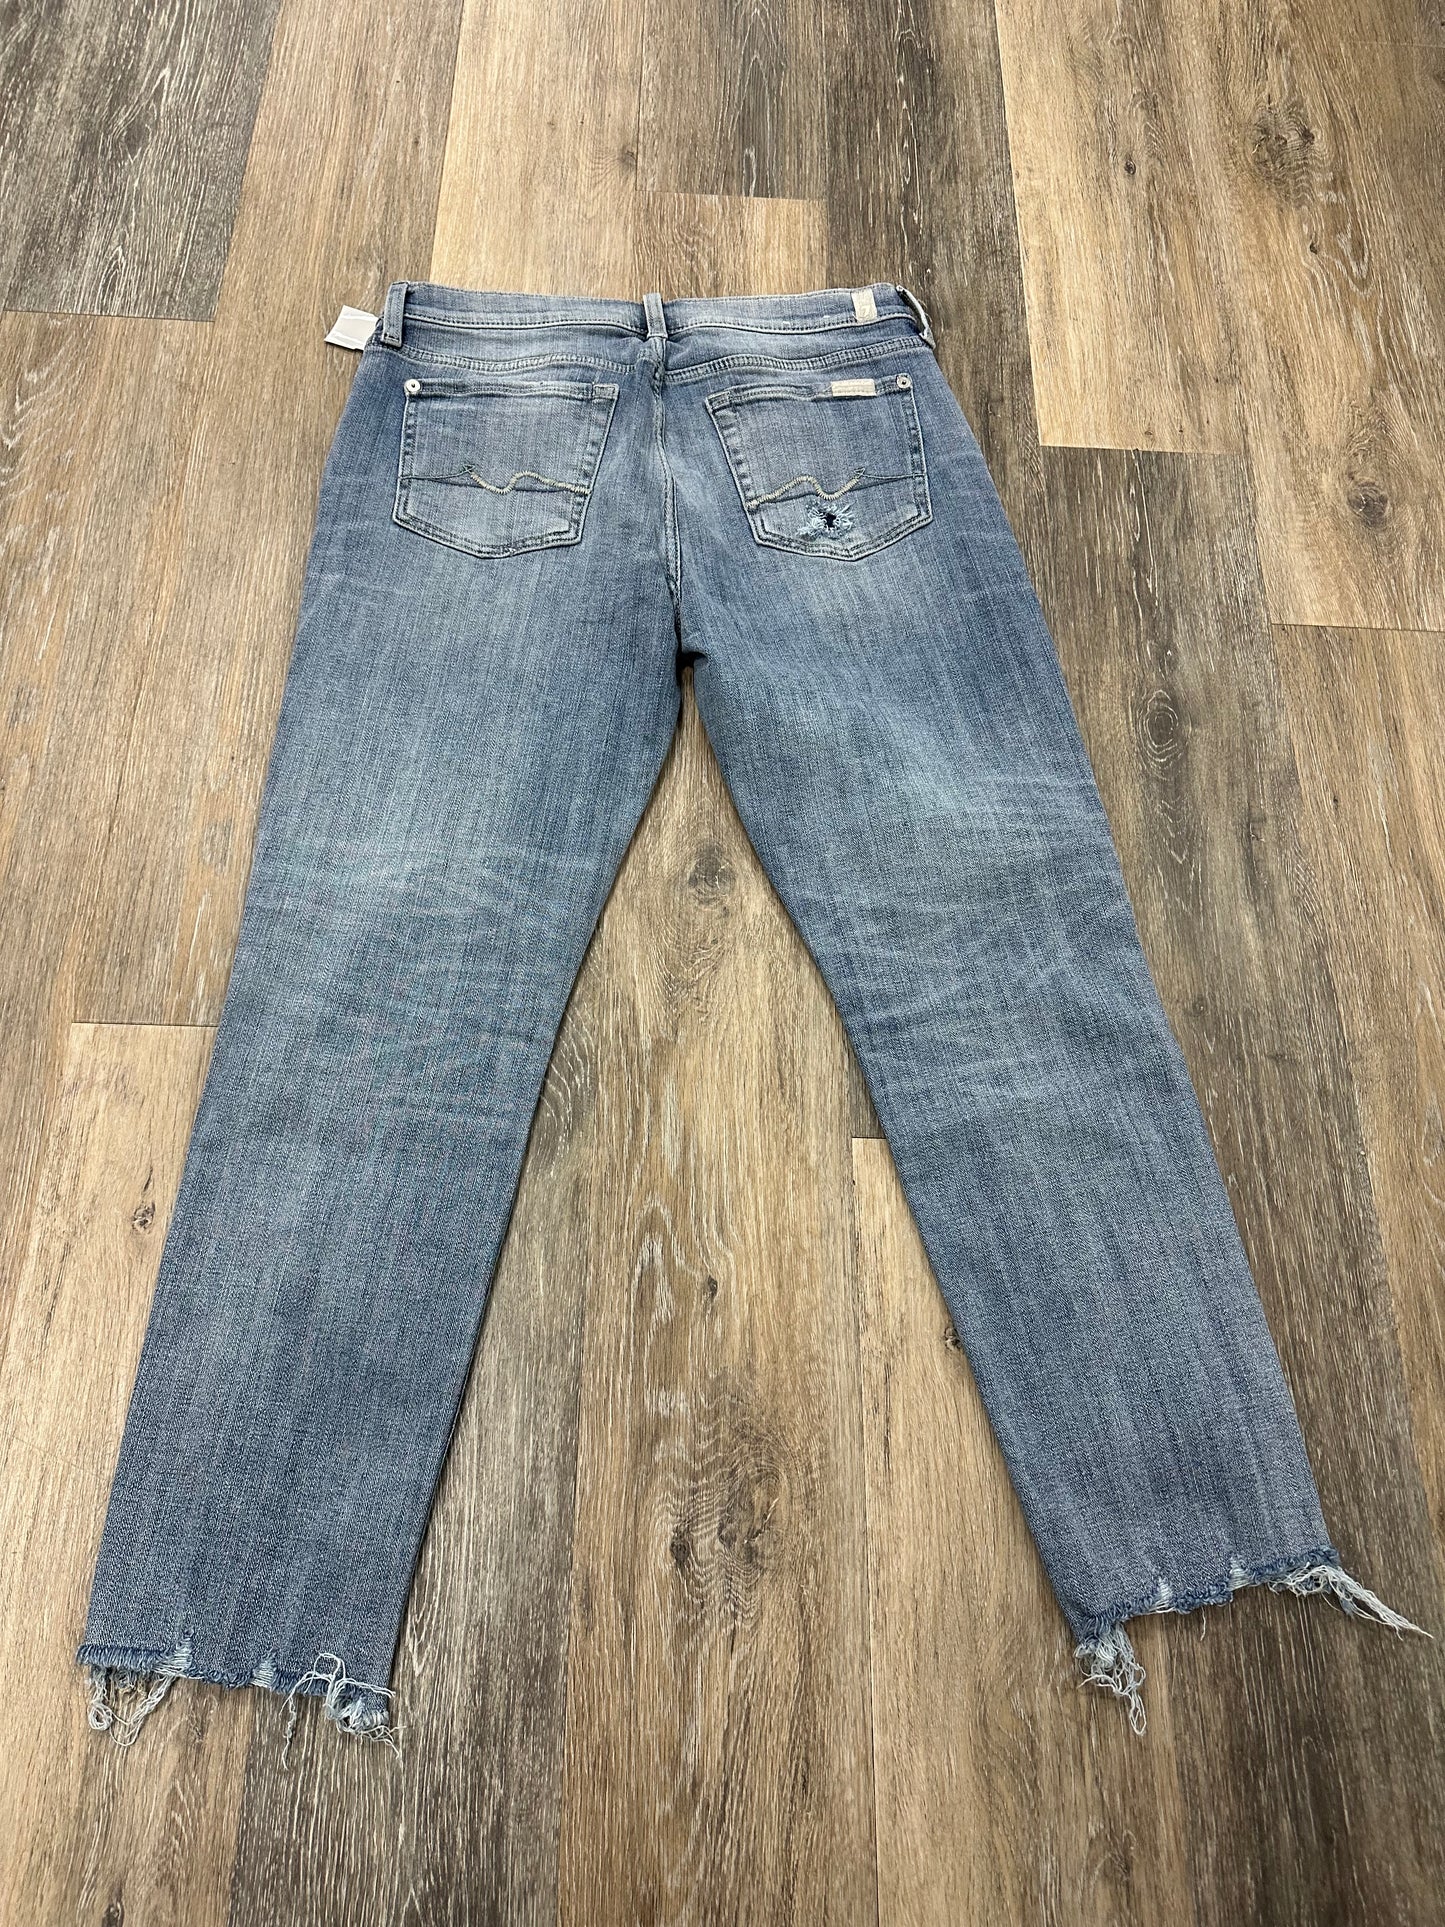 Jeans Designer By Seven For All Mankind  Size: 8